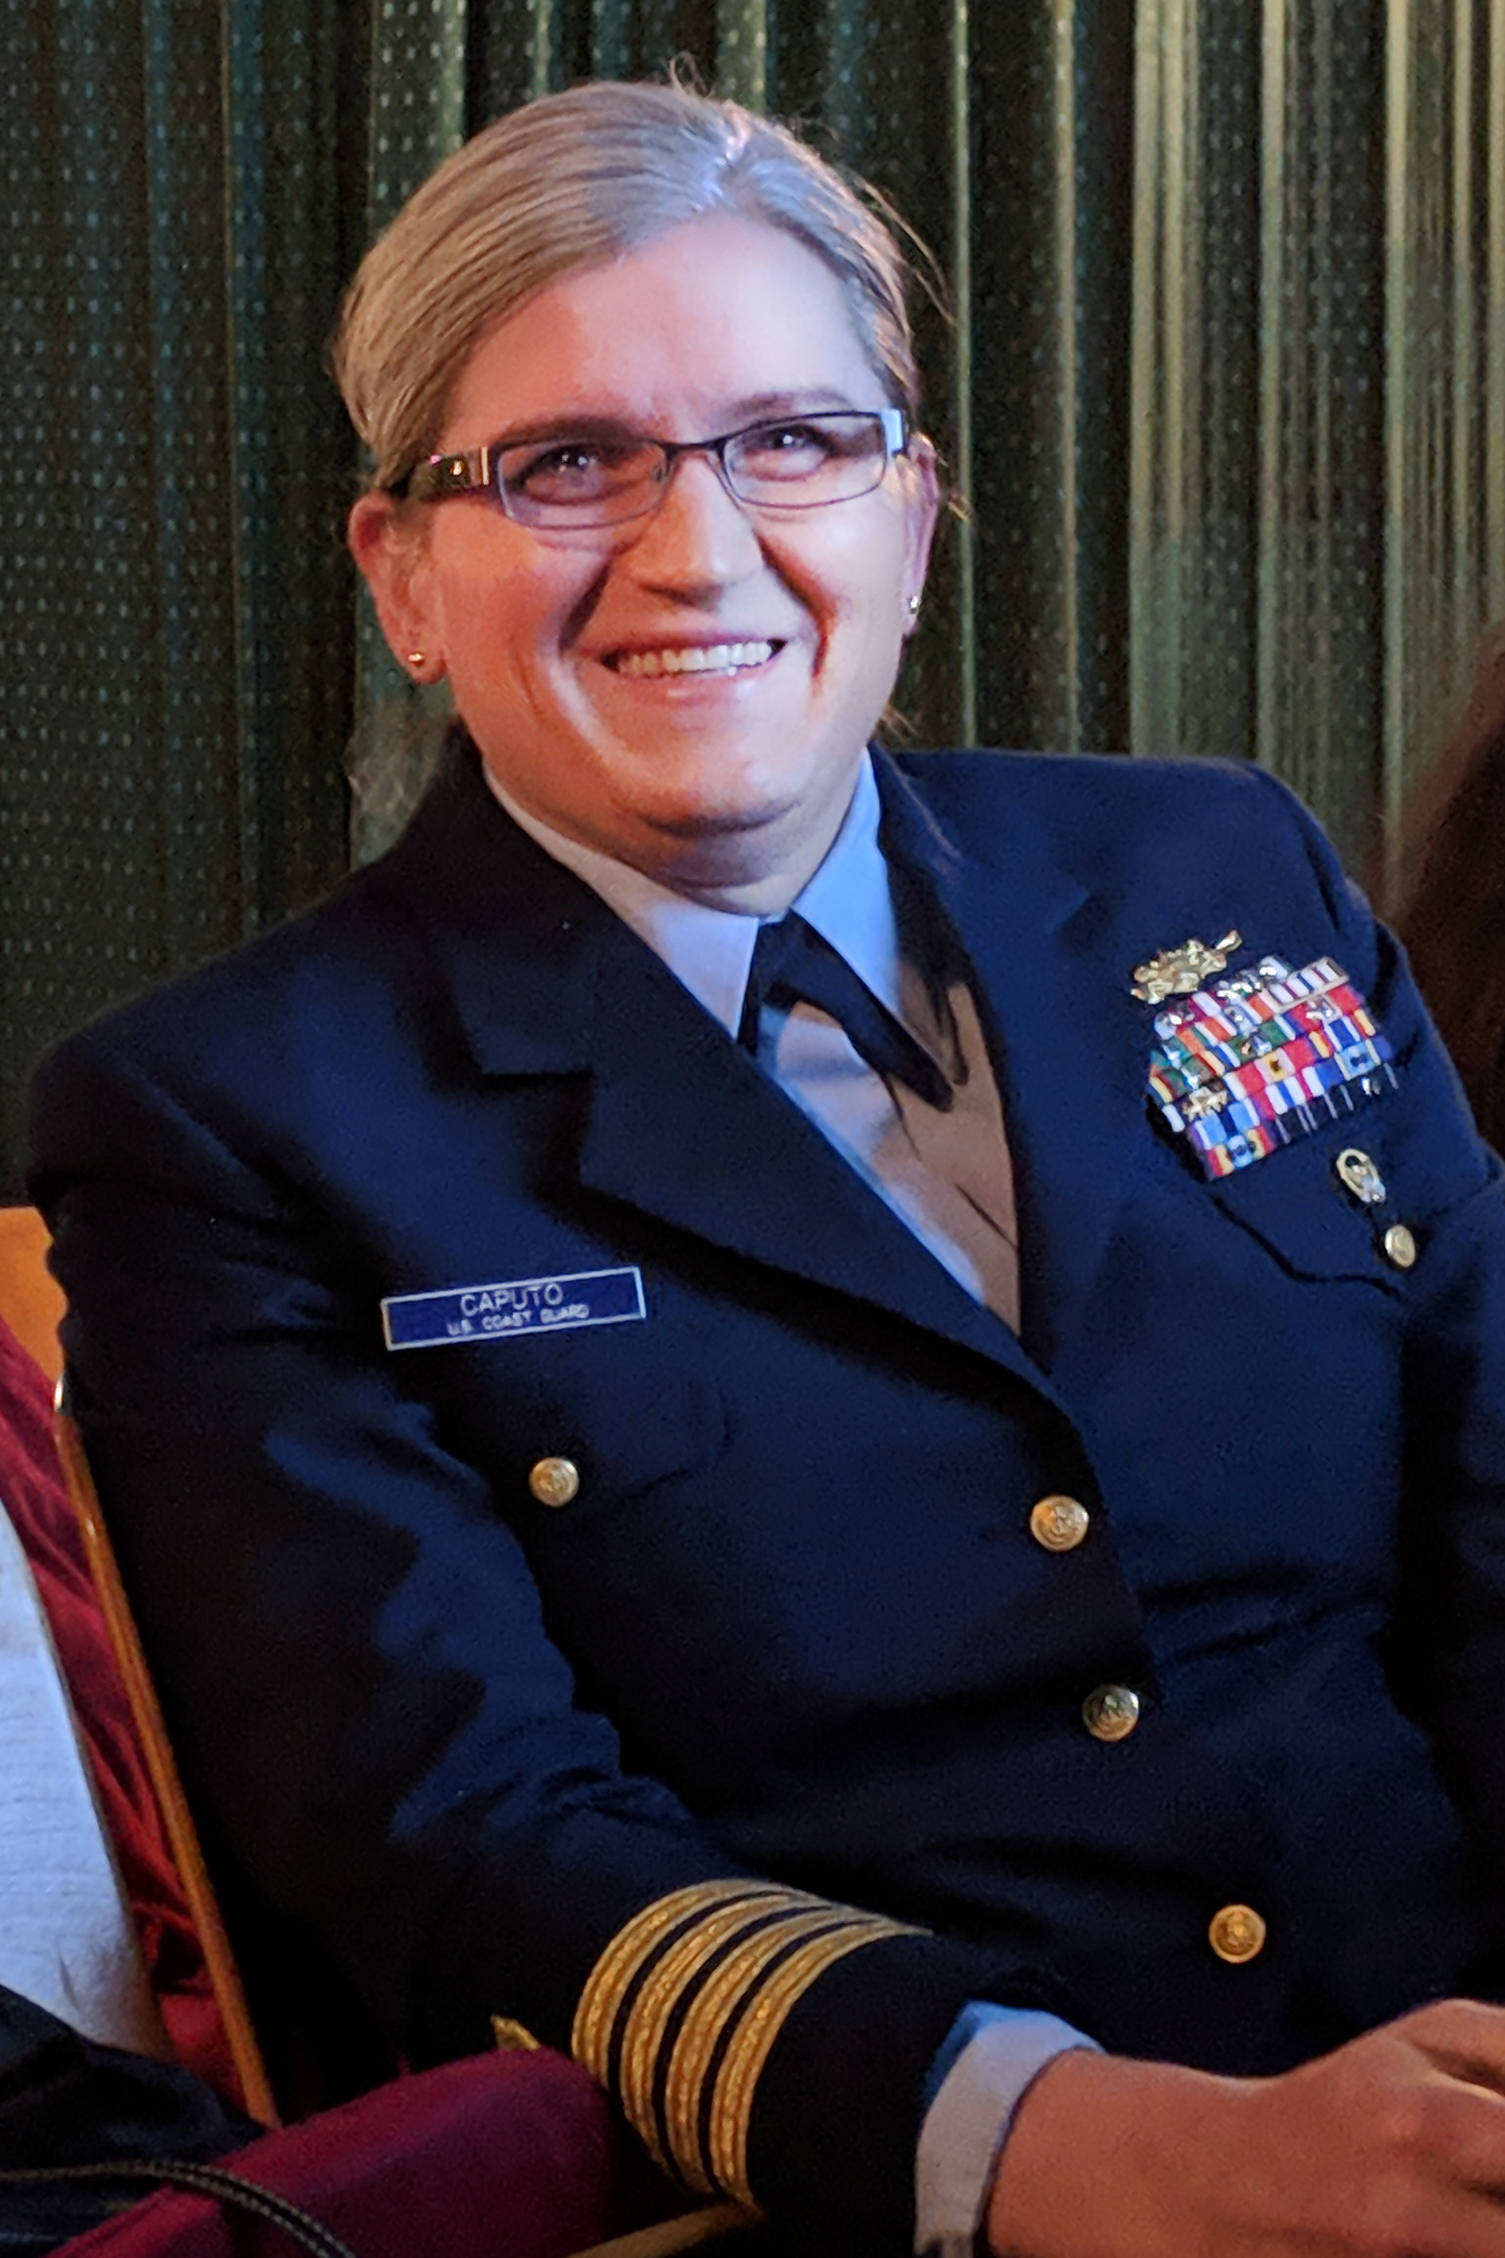 Capt. Allison Caputo smiles after a member of Juneau’s LGBTQ community delivered lighthearted marks about their experience transitioning to male Tuesday Nov. 19 at a Transgender Day of Remembrance event. Caputo’s own speech was more somber and detailed her experiences as a transgender member of the military. (Ben Hohenstatt | Capital City Weekly)